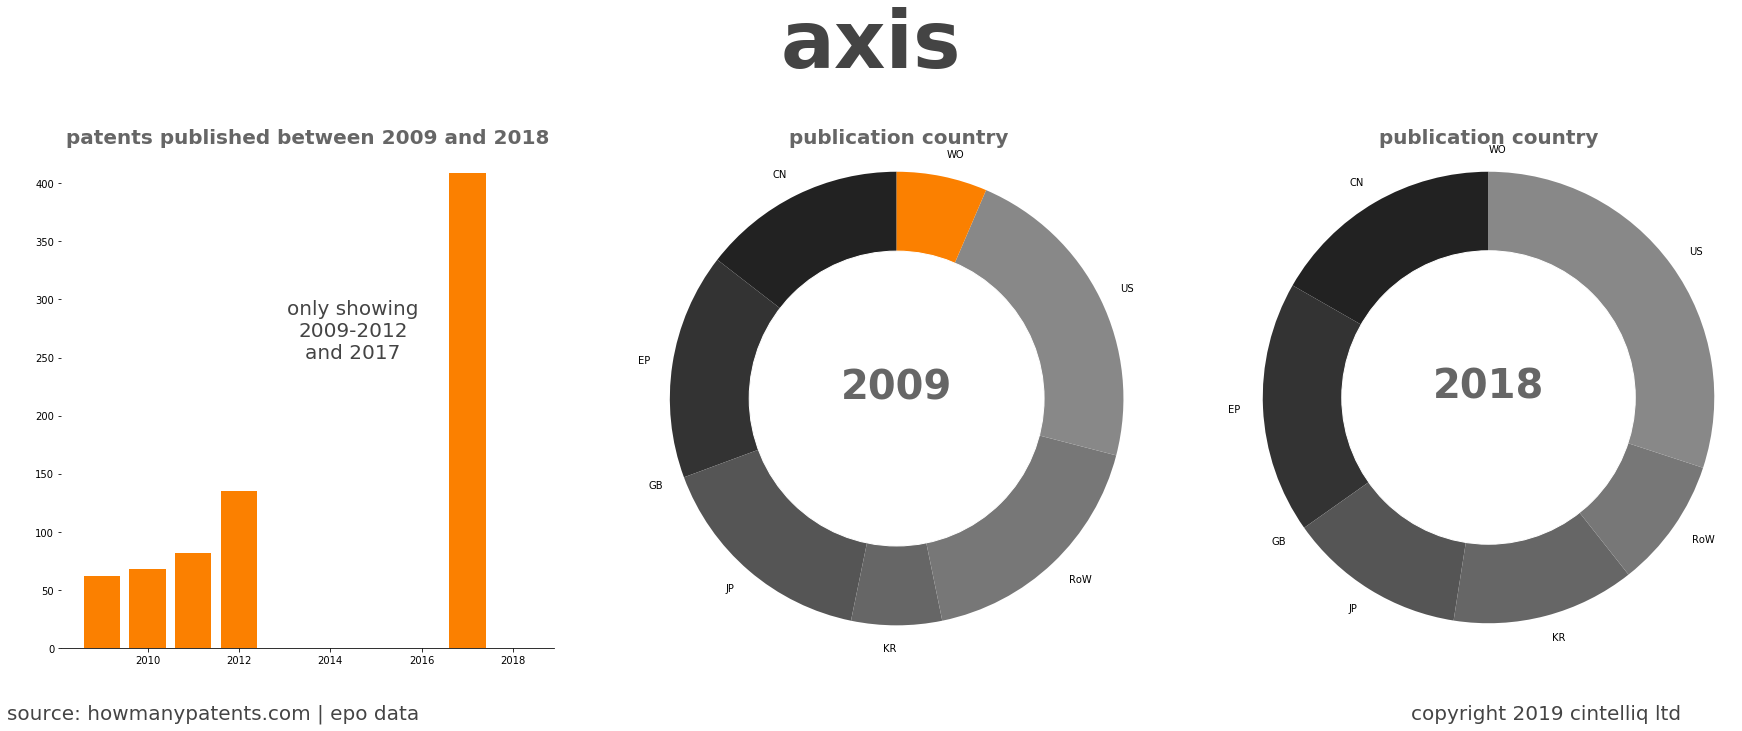 summary of patents for Axis